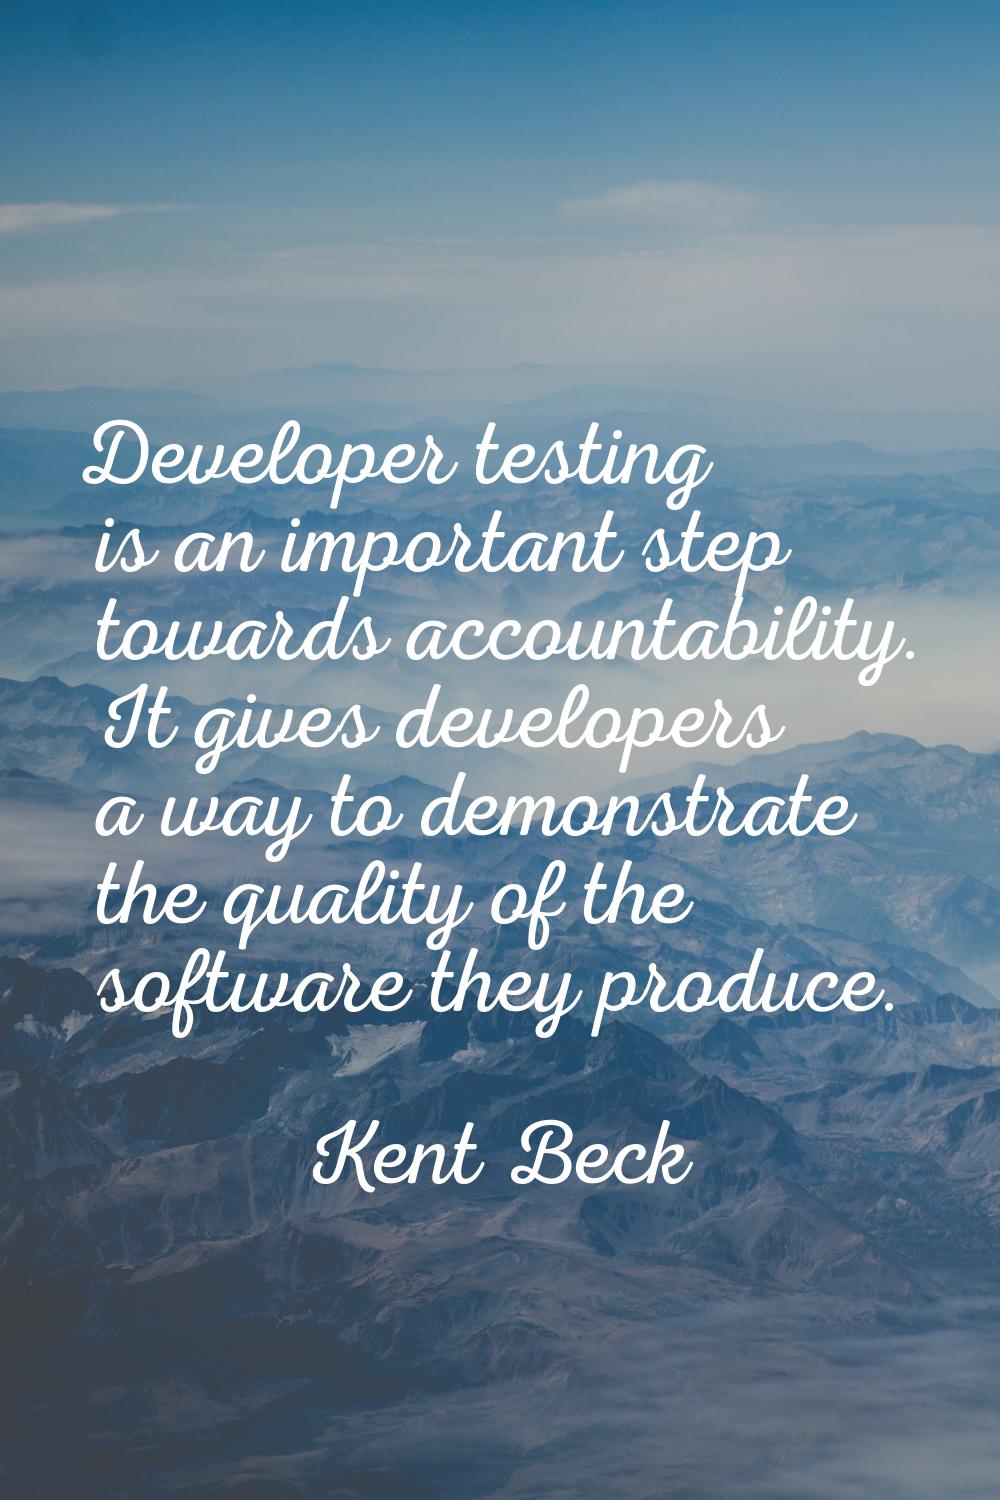 Developer testing is an important step towards accountability. It gives developers a way to demonst